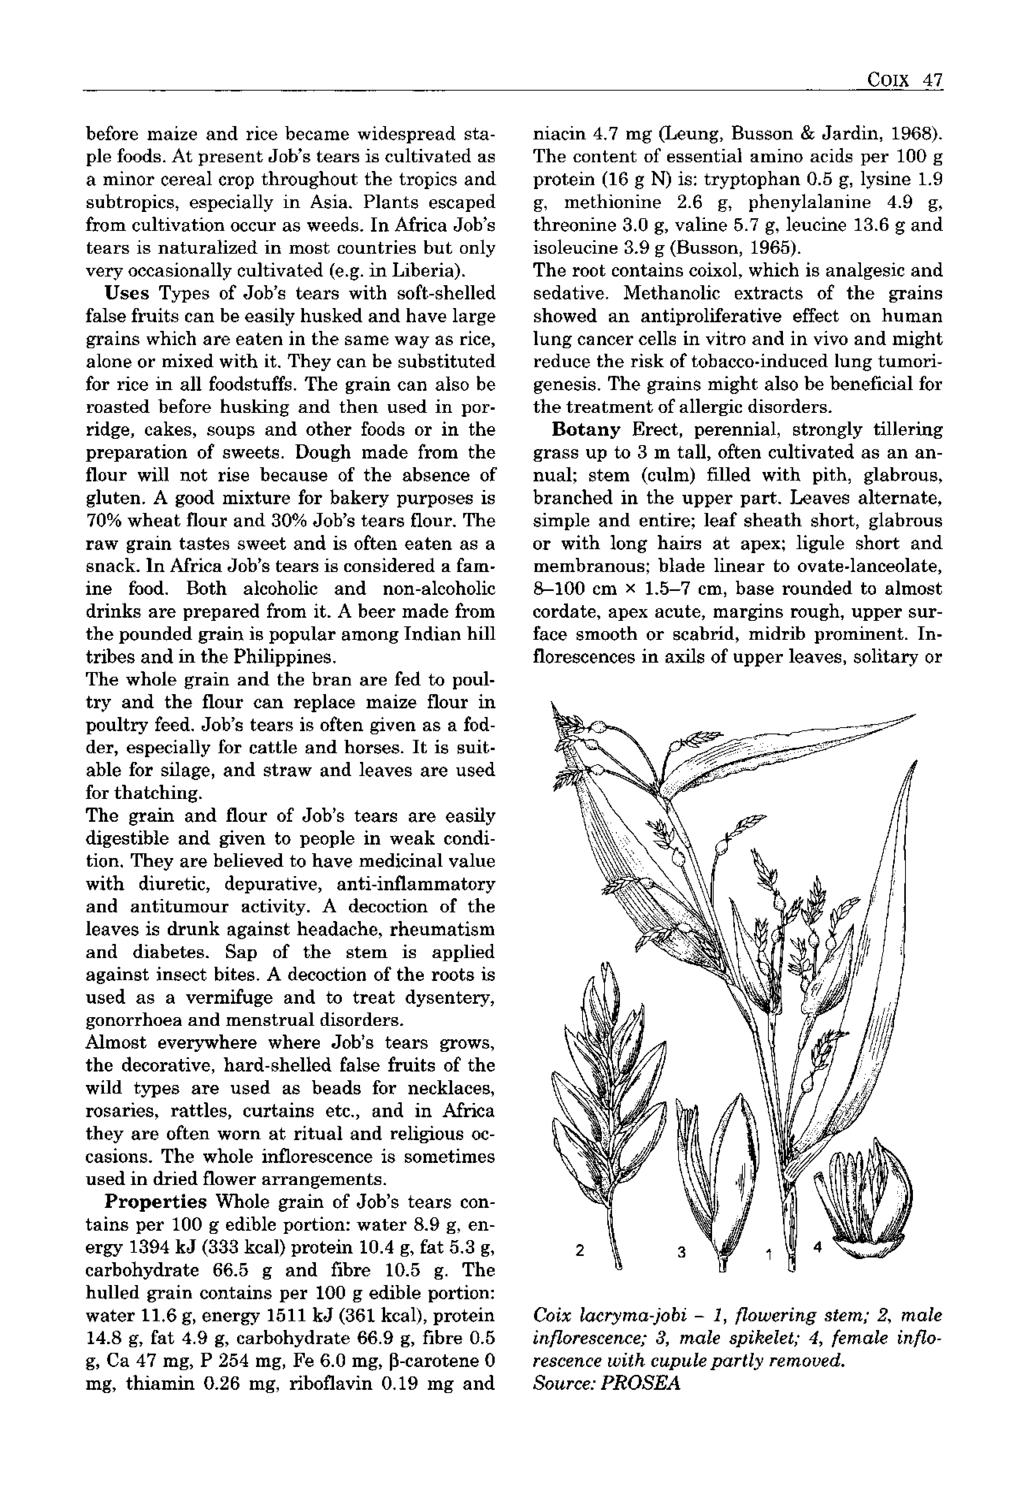 COIX 47 before maize and rice became widespread staple foods. At present Job's tears is cultivated as a minor cereal crop throughout the tropics and subtropics, especially in Asia.